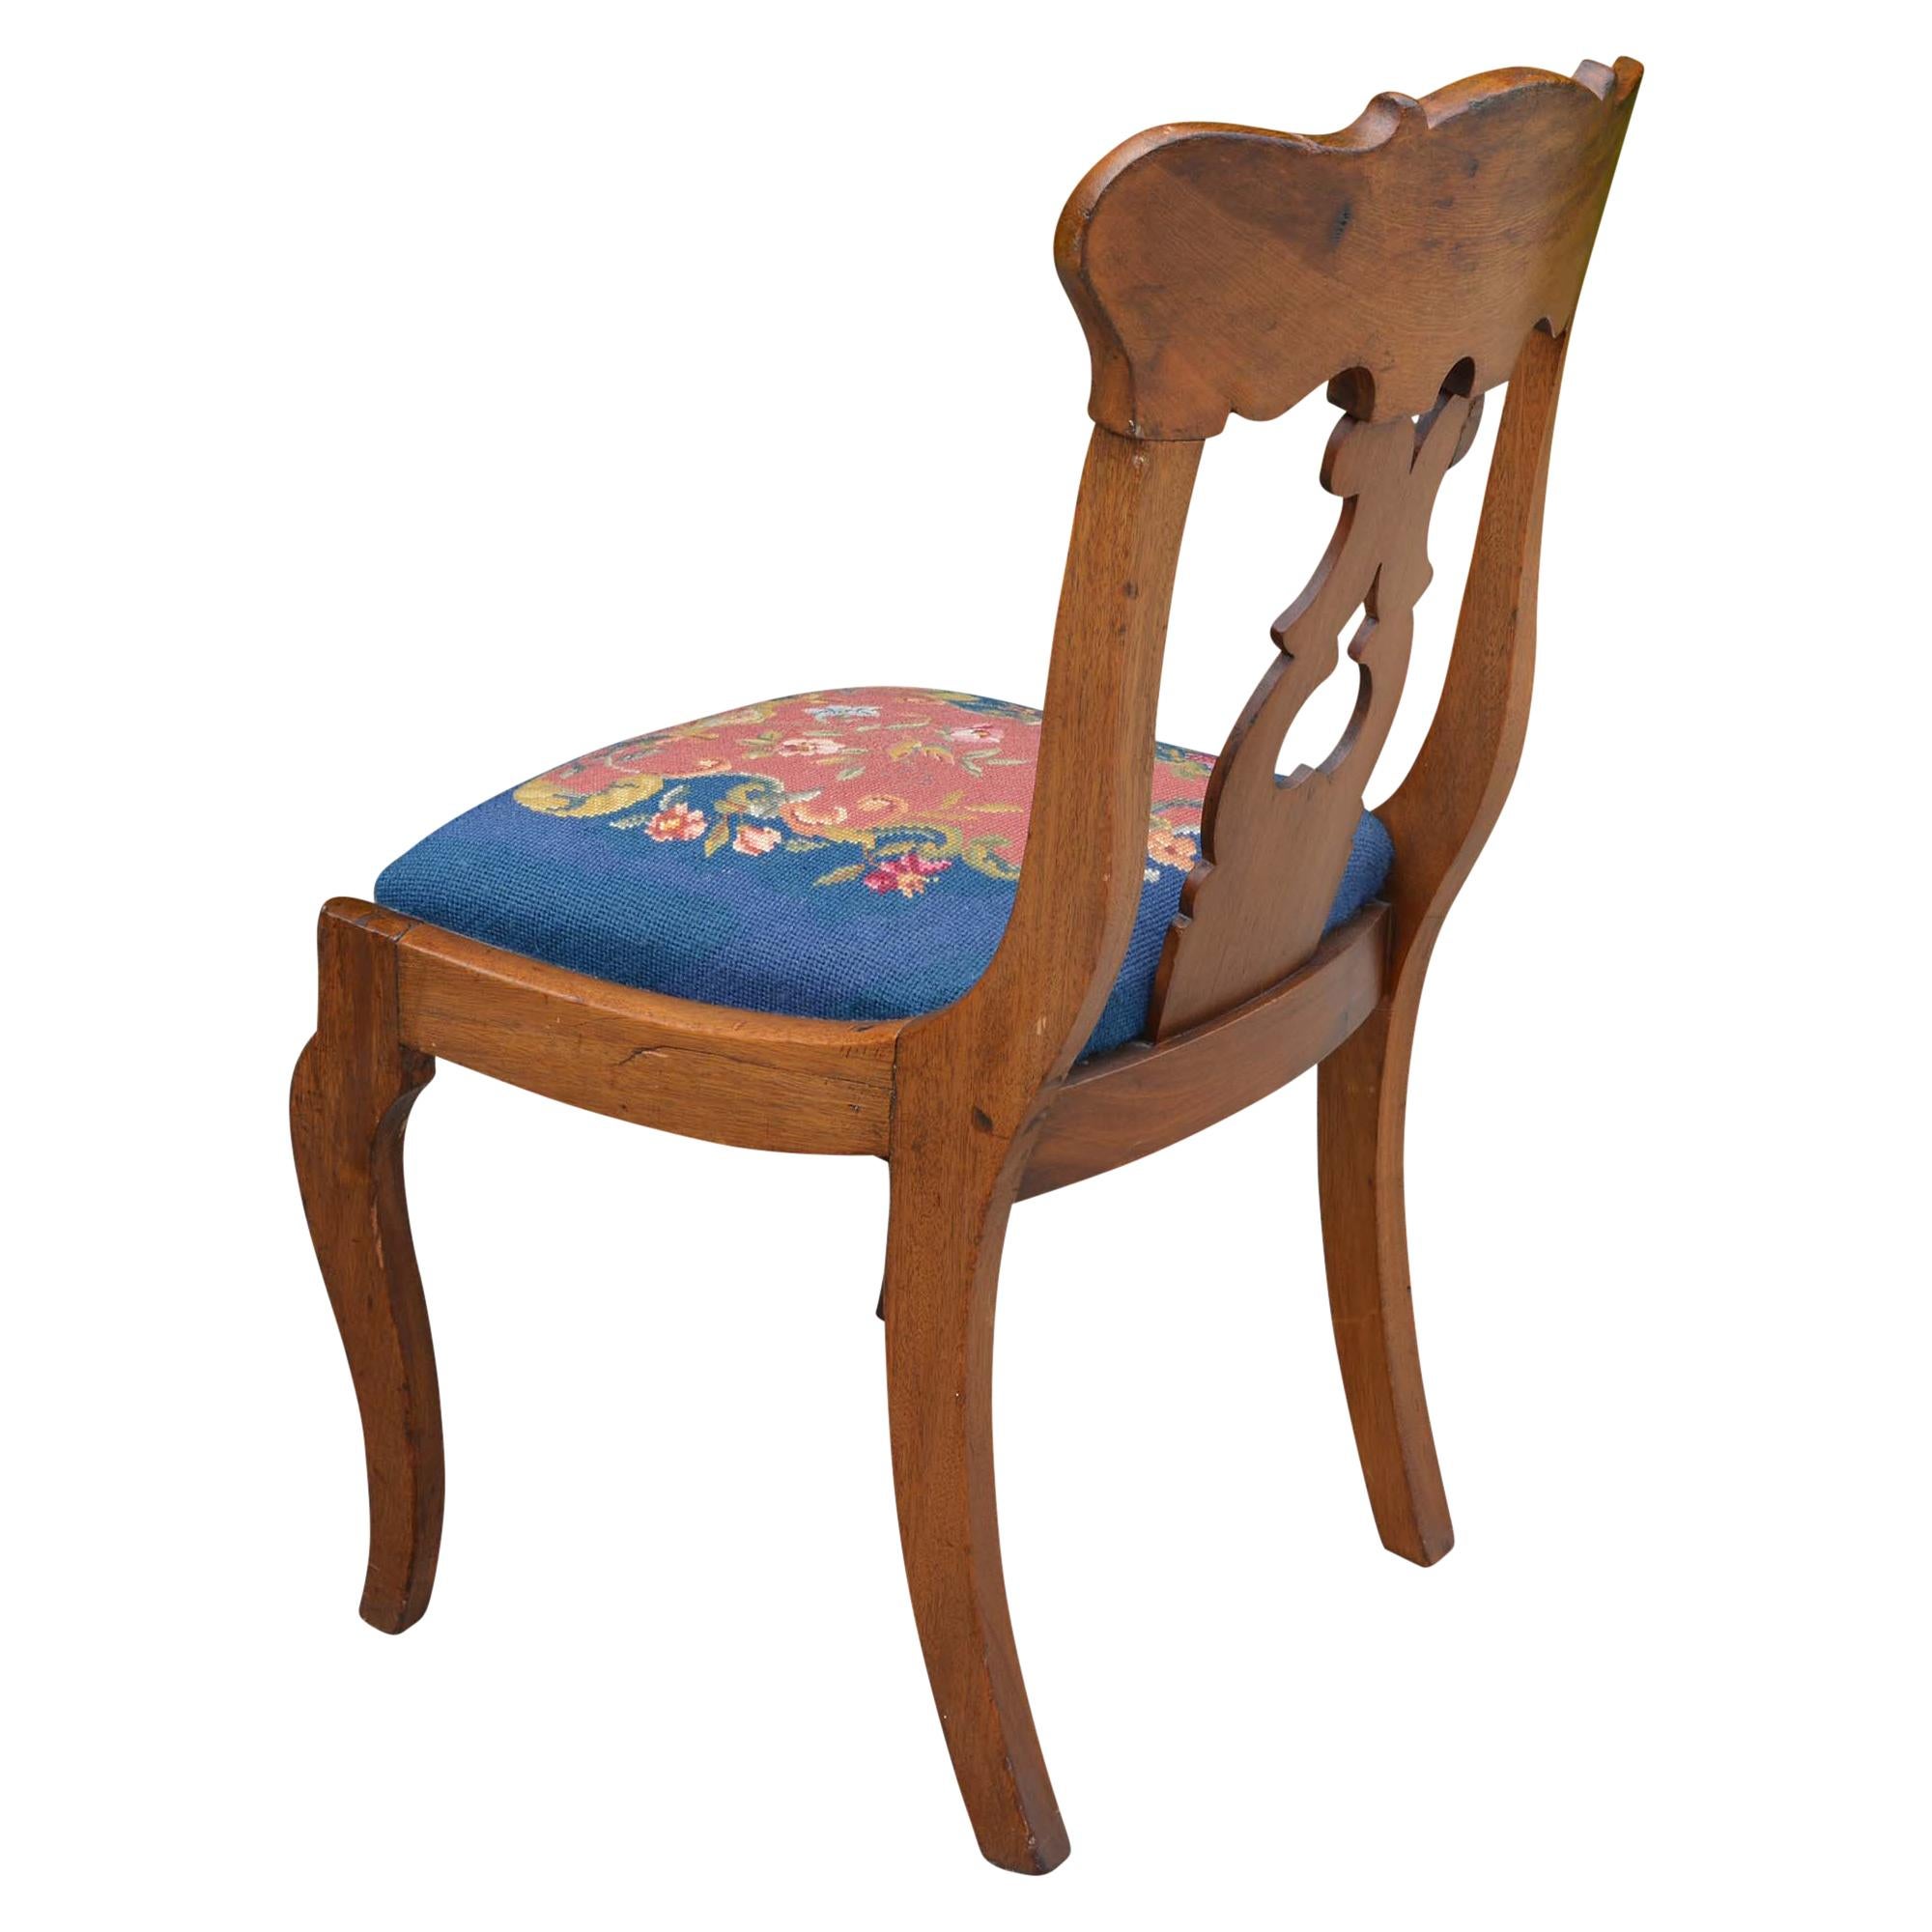 We found this unique parlor chair at an estate sale. The wood tone works so well with the color of the needlepoint seat. The back support has an open design which adds additional character.